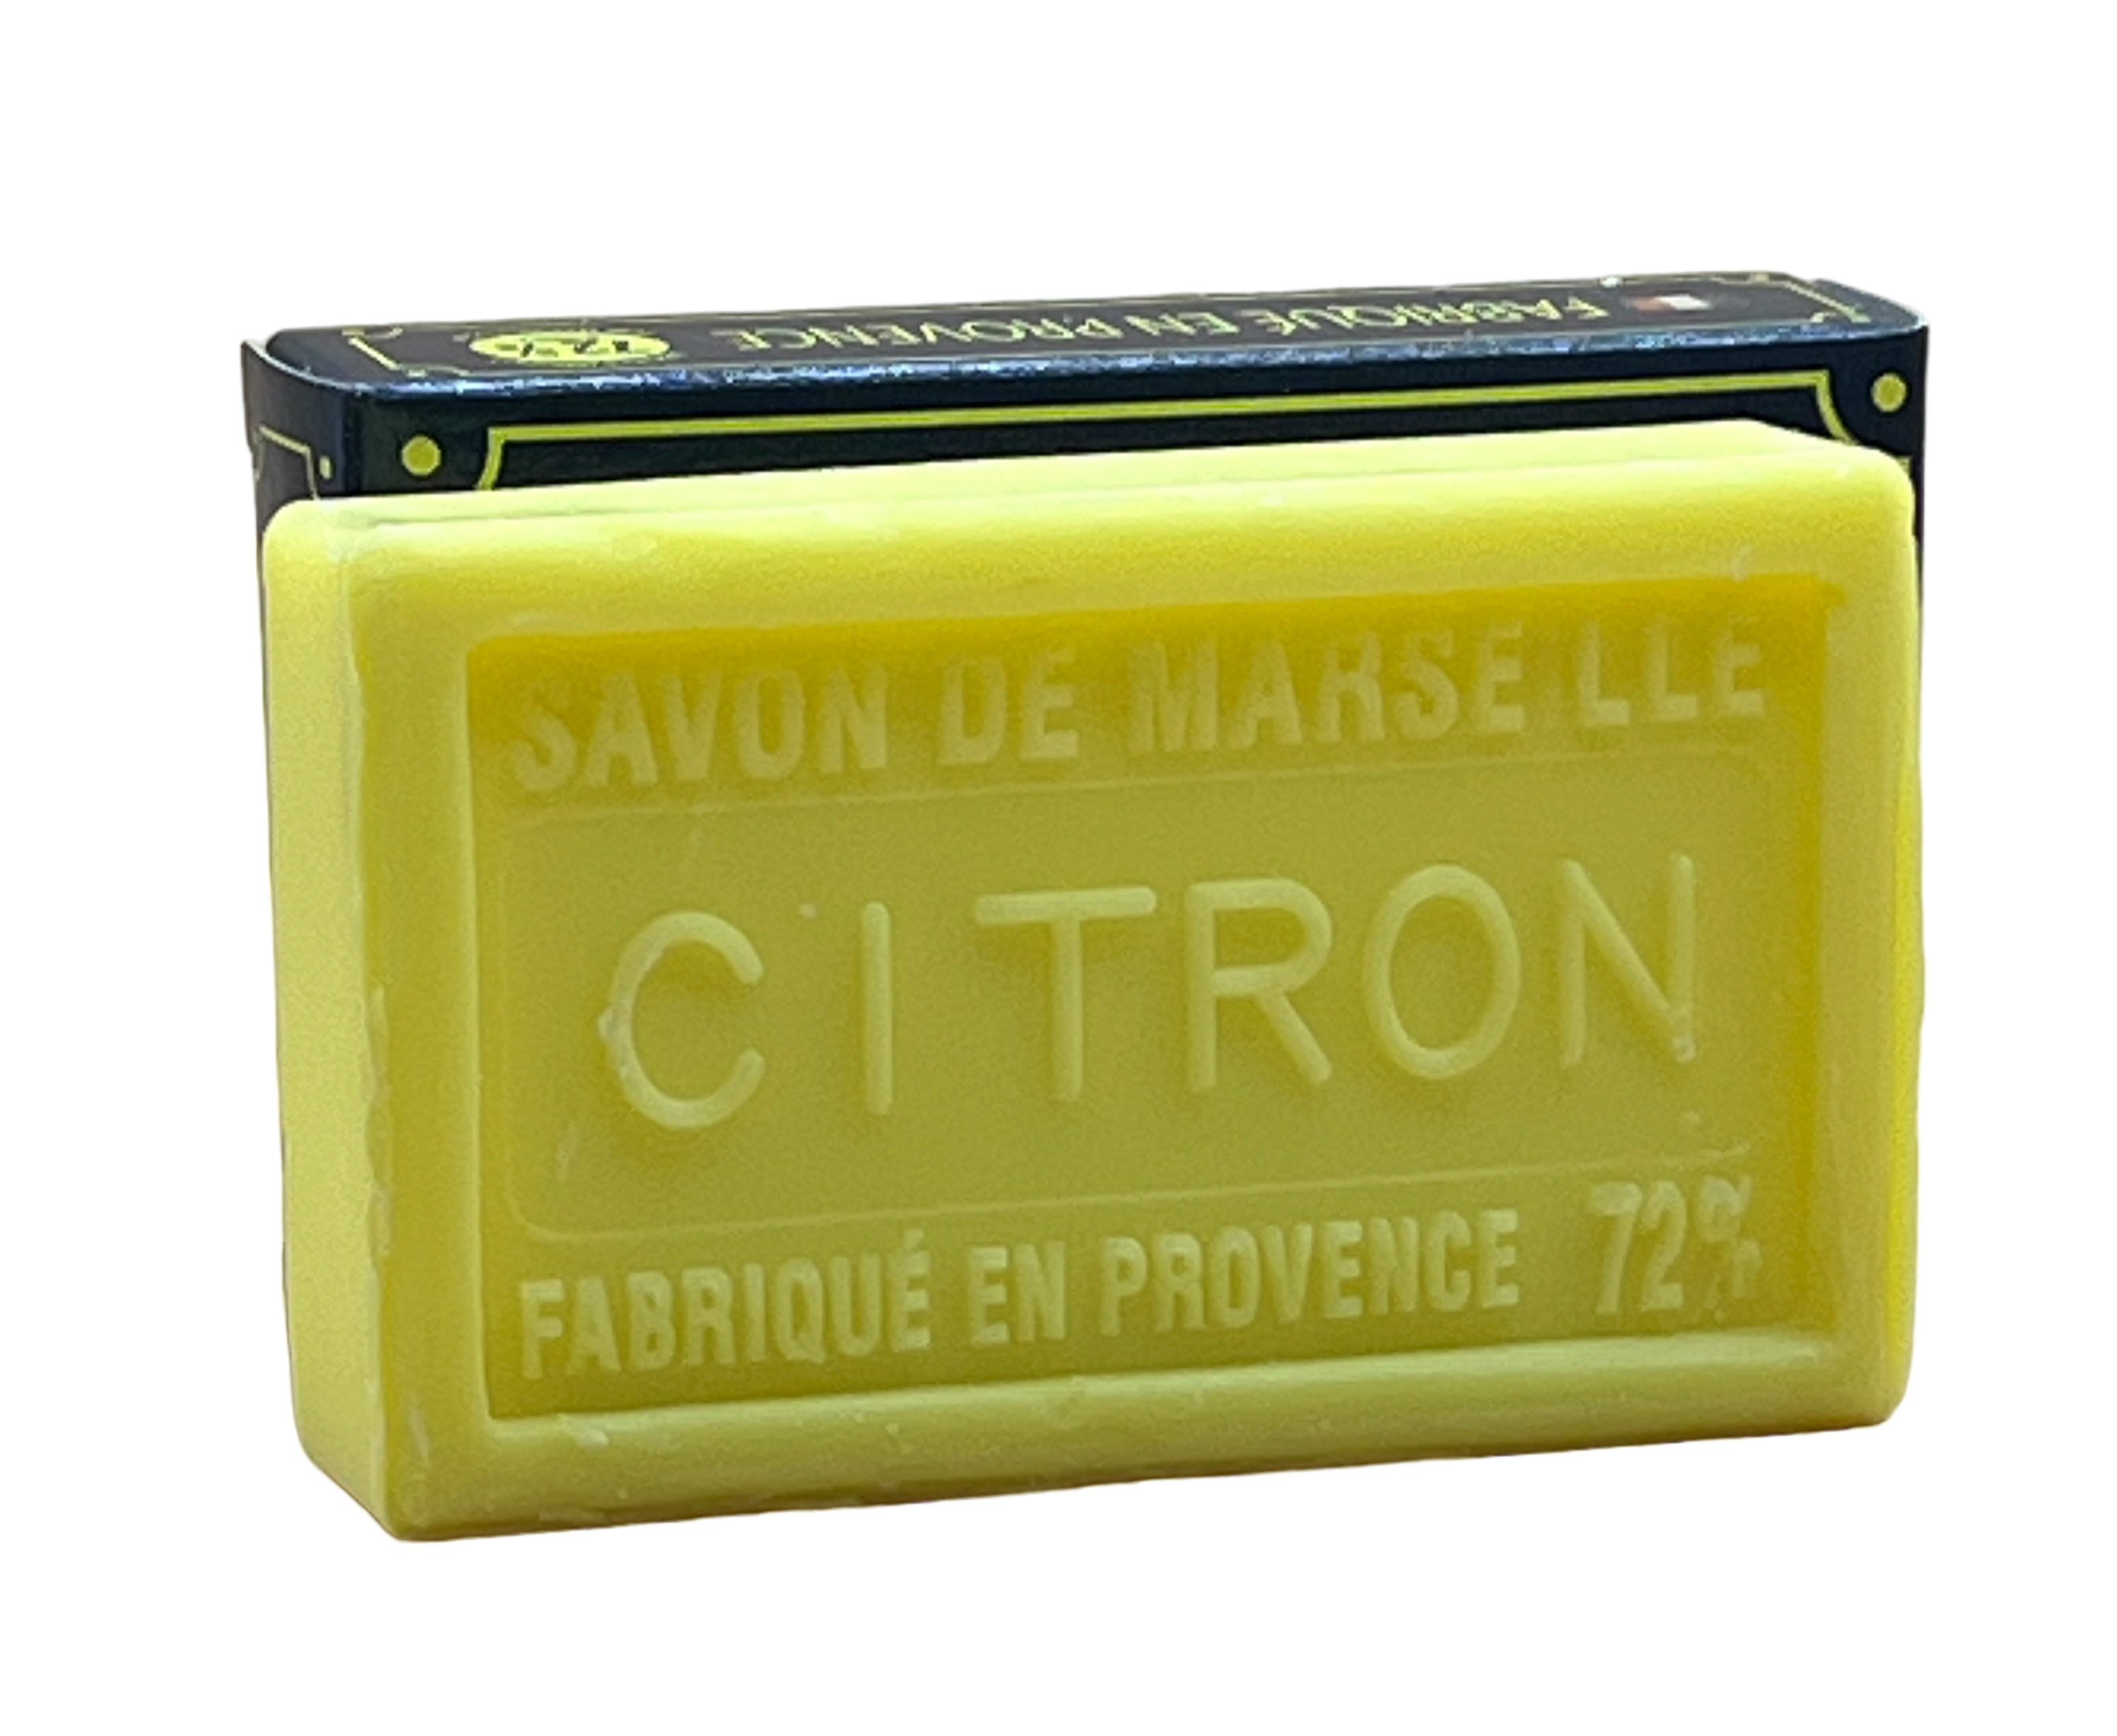 Citron, Marseille Soap with Shea Butter | 100g - 0